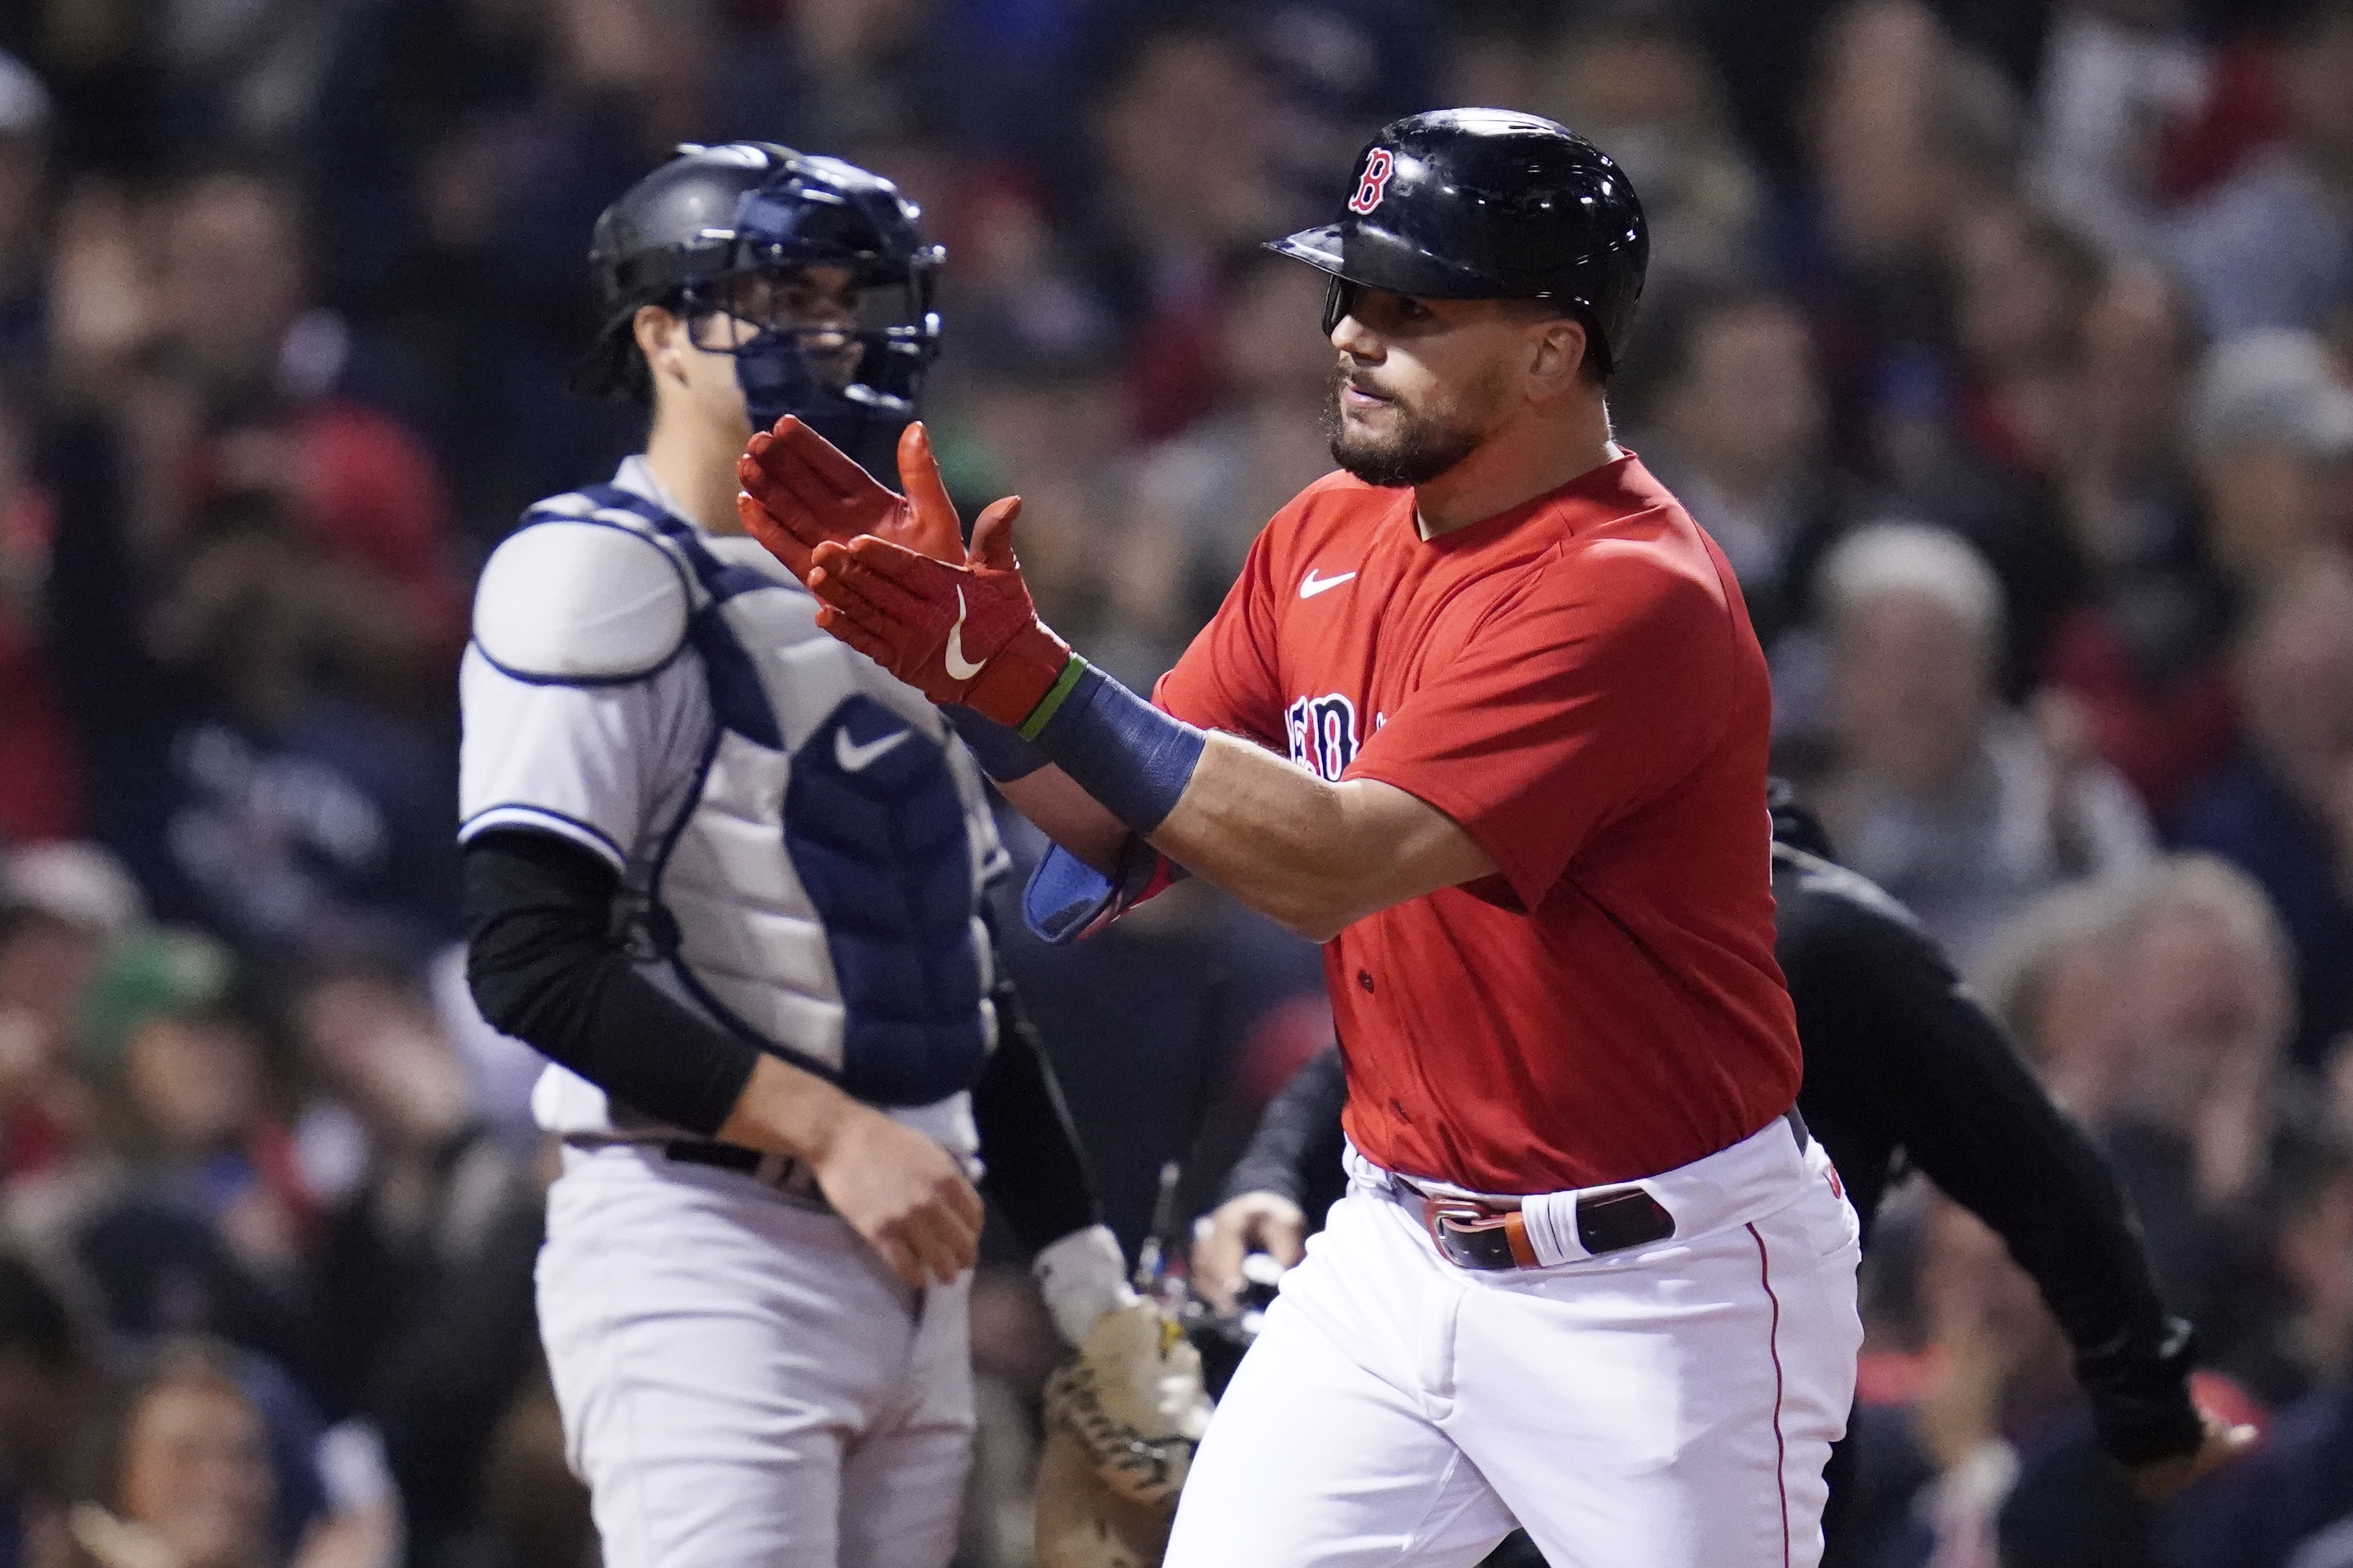 2013 World Series: Shane Victorino may have played Game 4 under AL